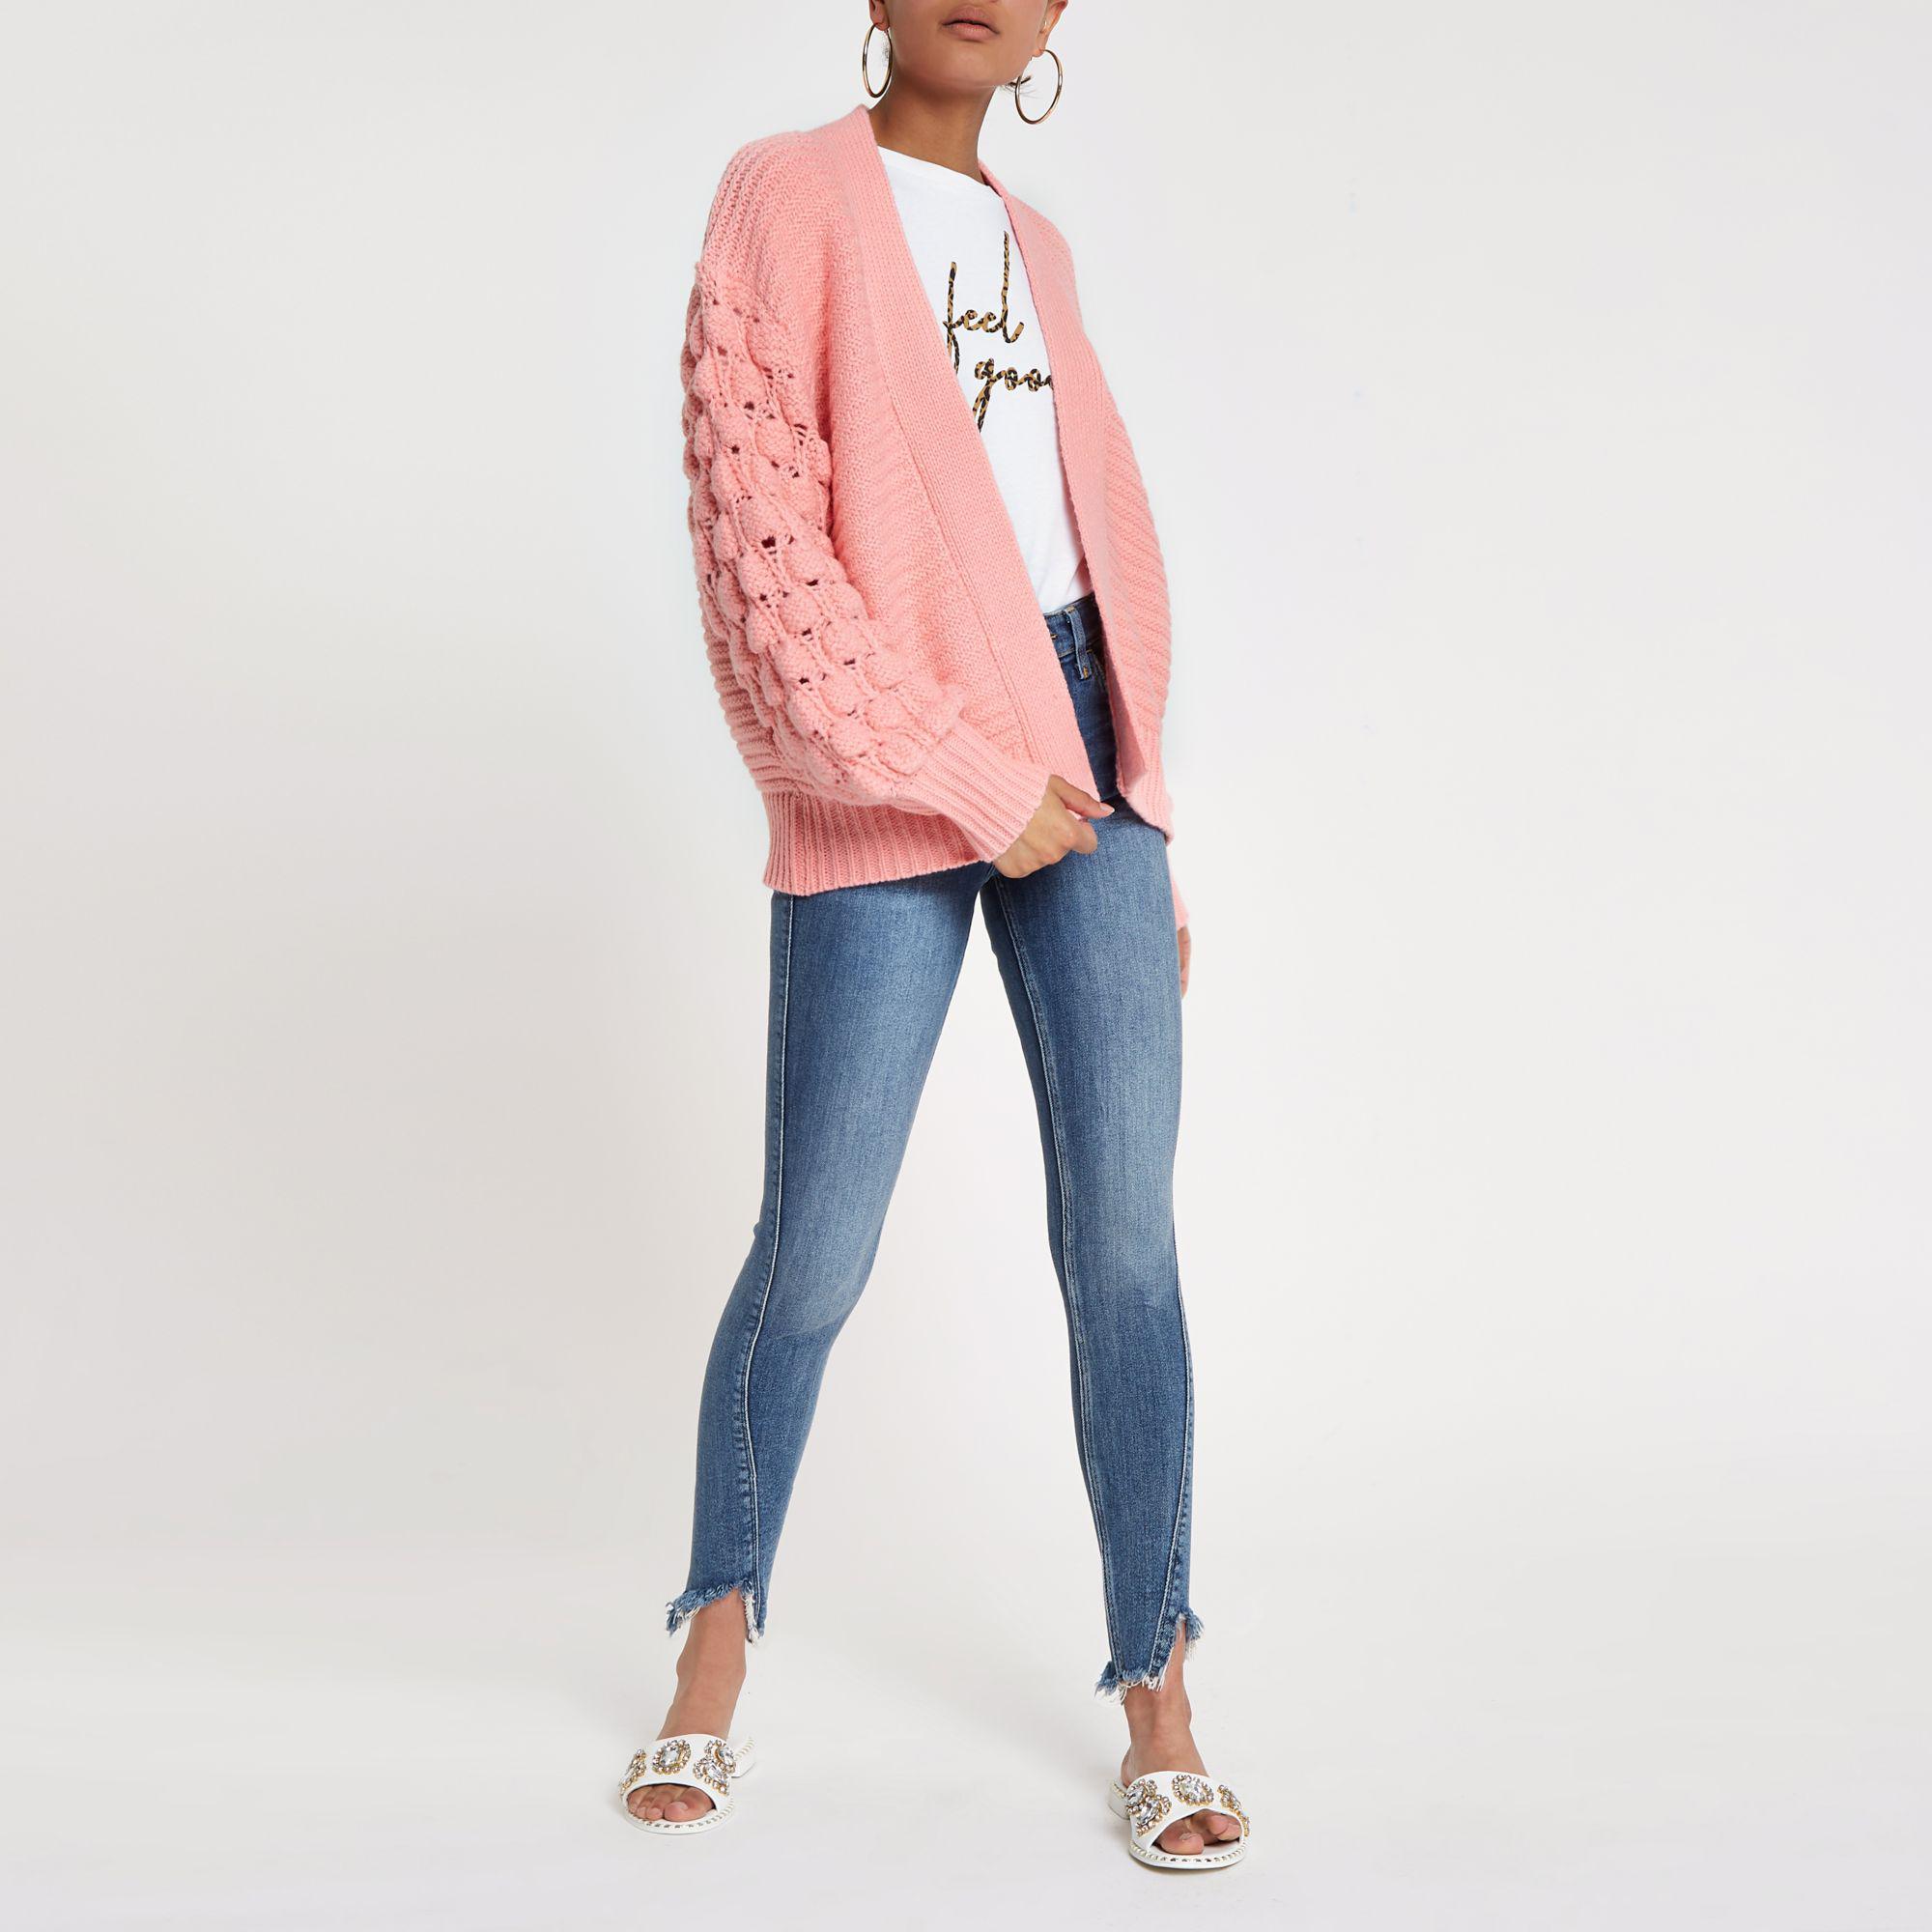 River Island Synthetic Light Pink Bobble Knit Cardigan - Lyst